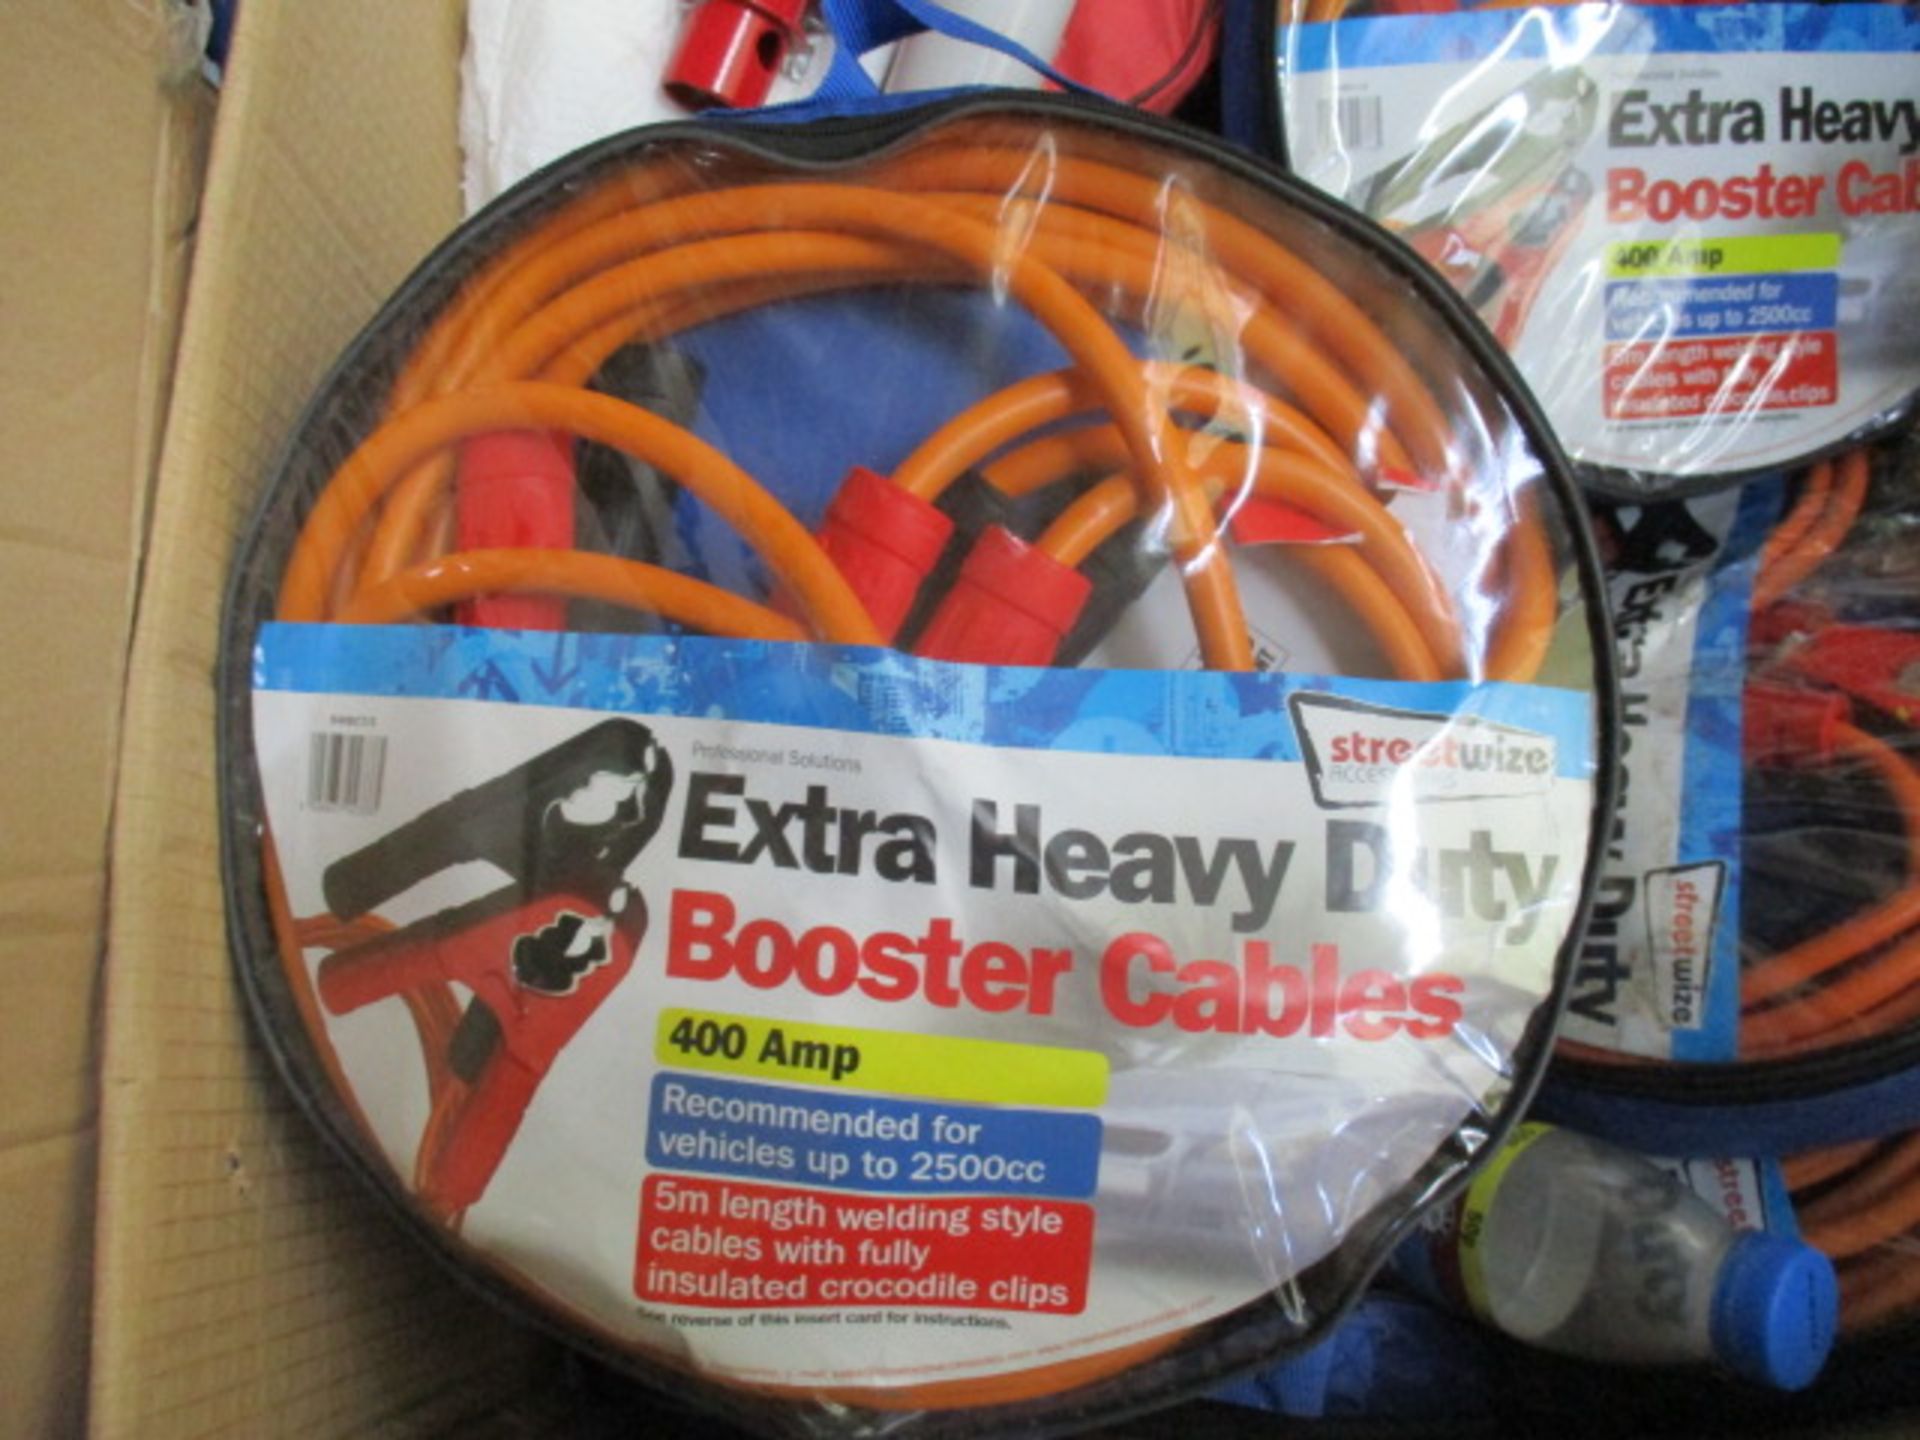 Heavy Duty brand new 400 Amp Booster cables new in pack rrp £34.99 - 5 metre length cable with